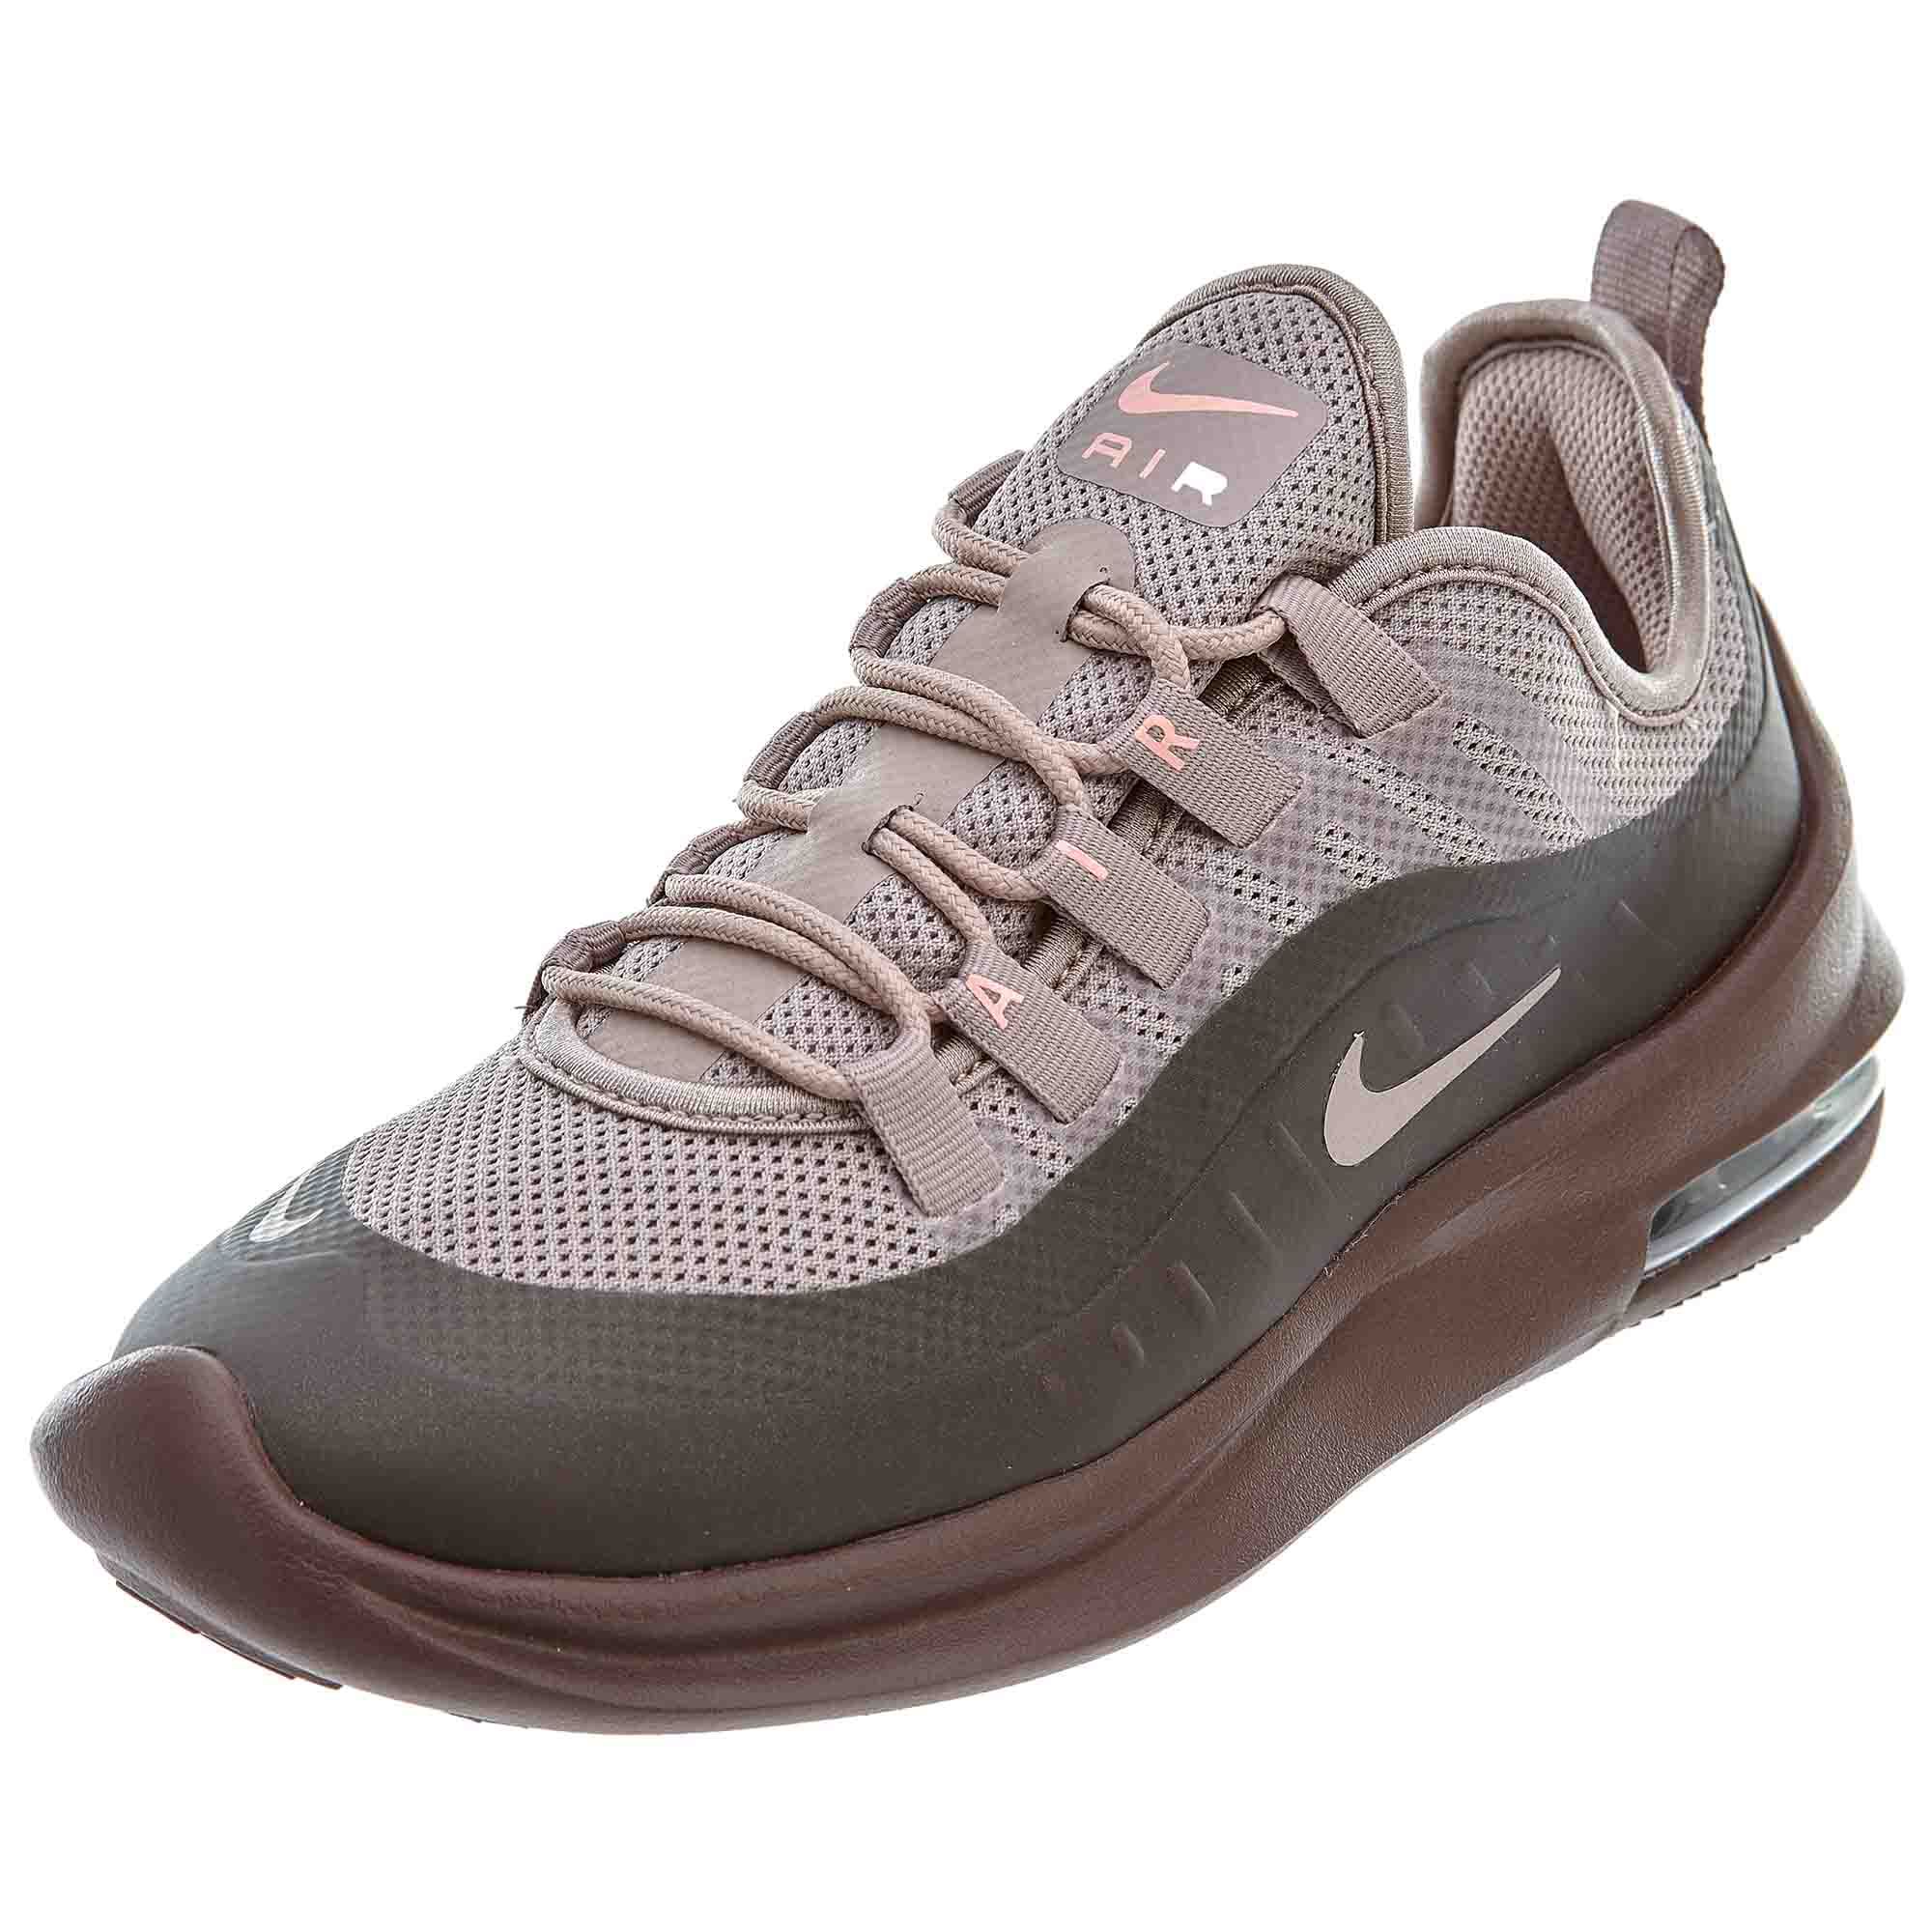 women's air max axis sneakers in taupe